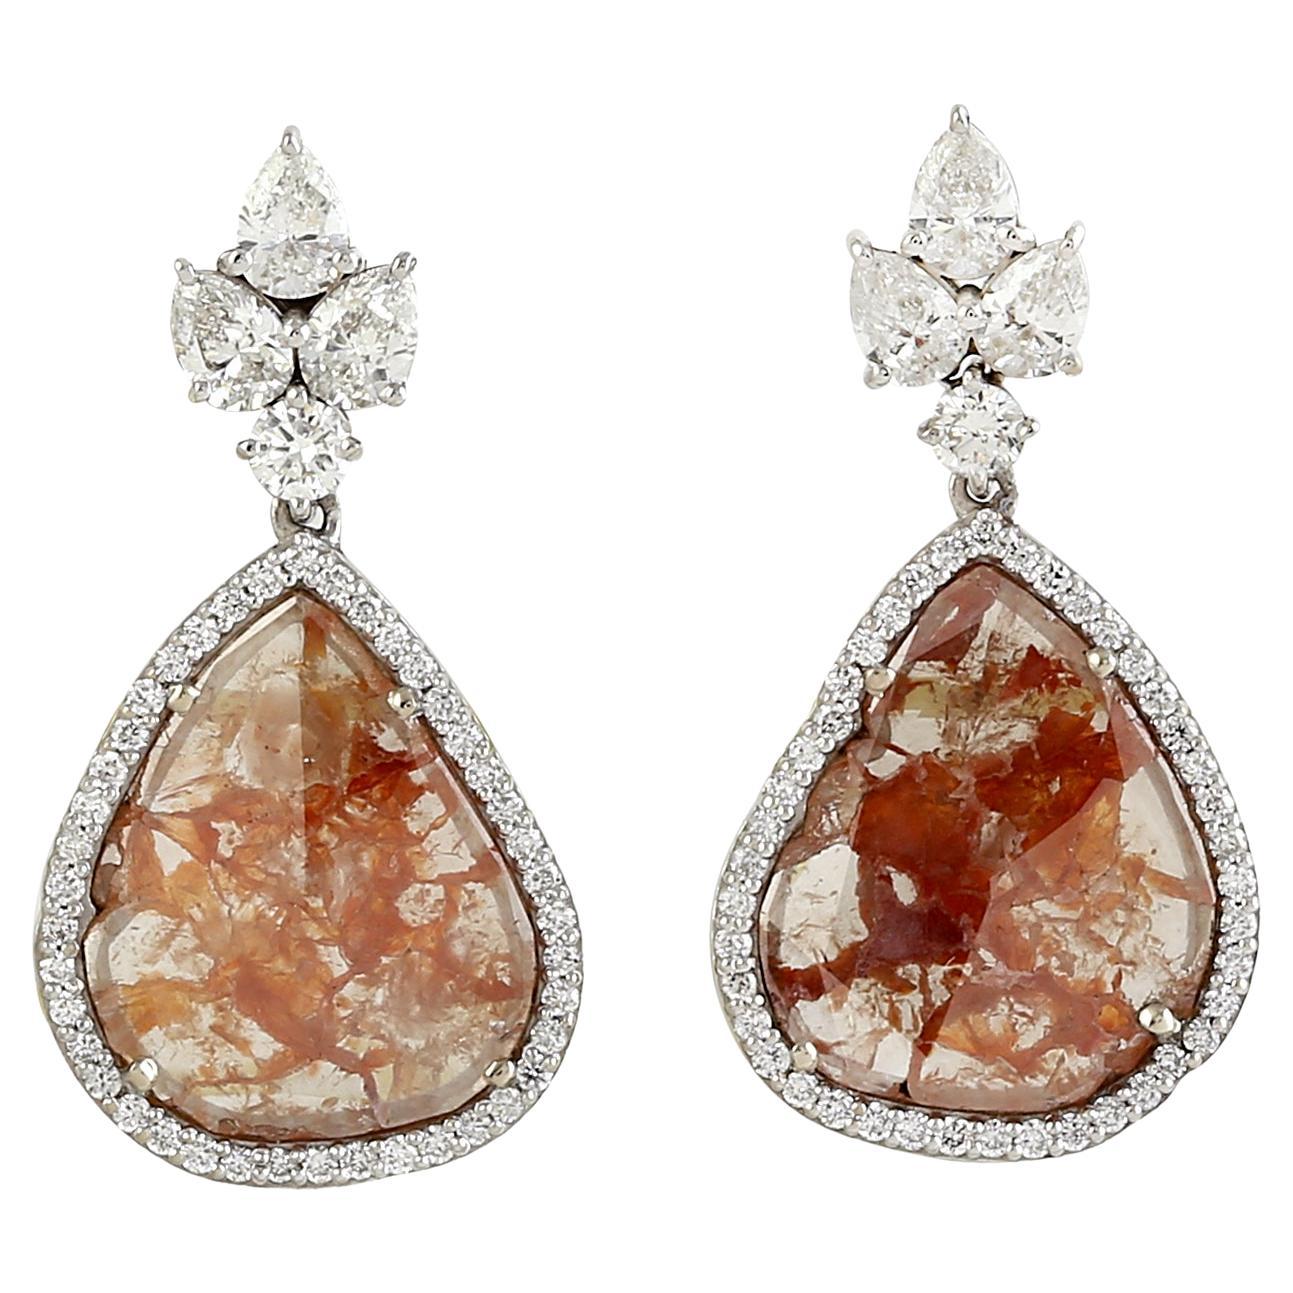 Uneven Shaped Sliced Ice Diamonds Dangle Earrings made In 18k White Gold